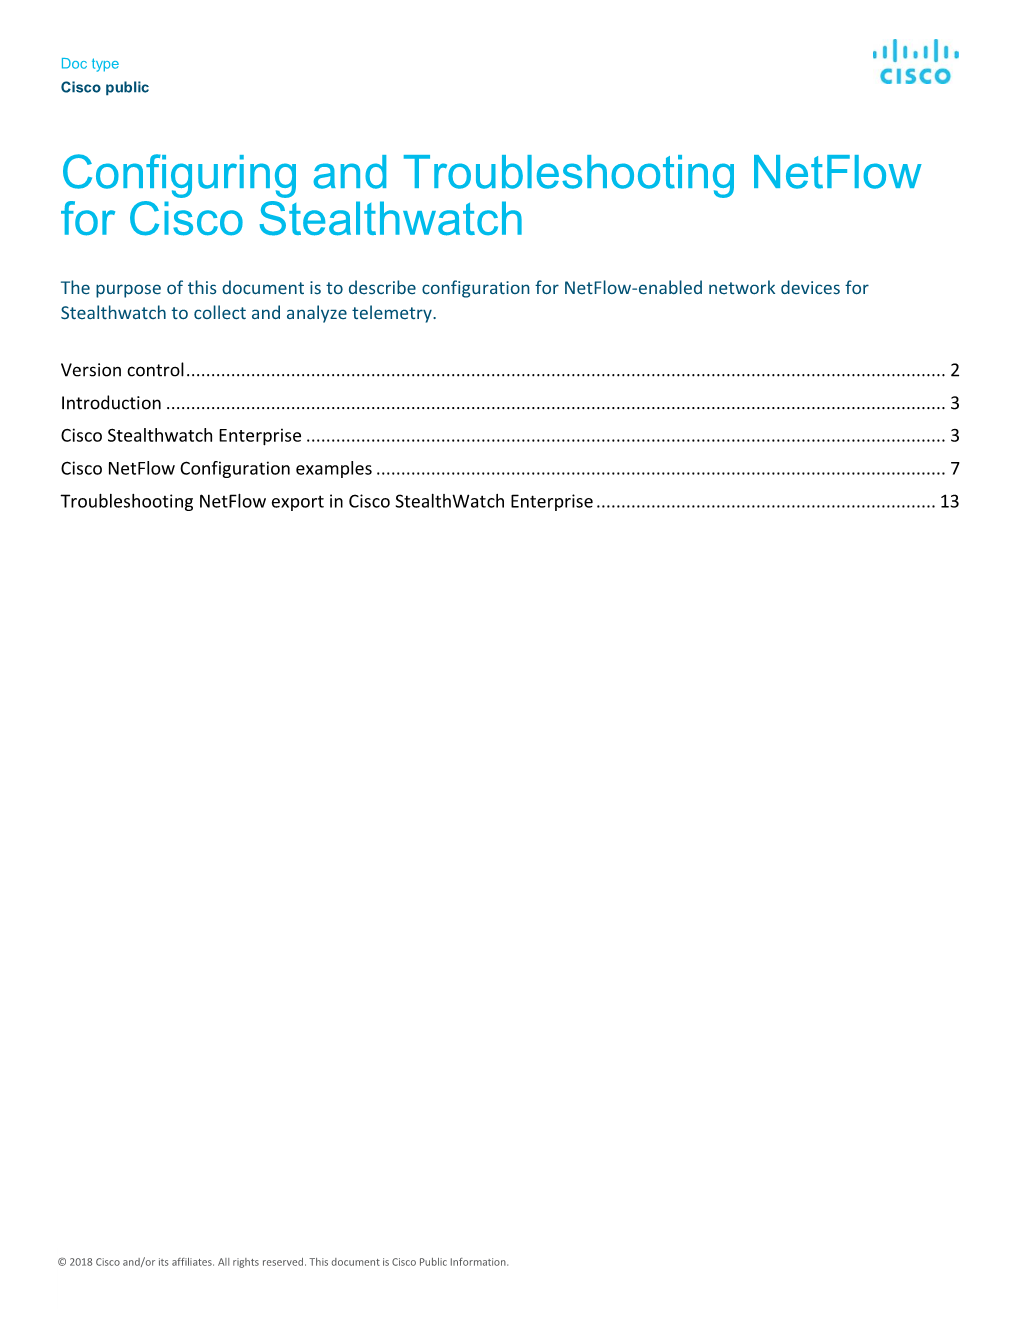 Configuring and Troubleshooting Netflow for Stealthwatch